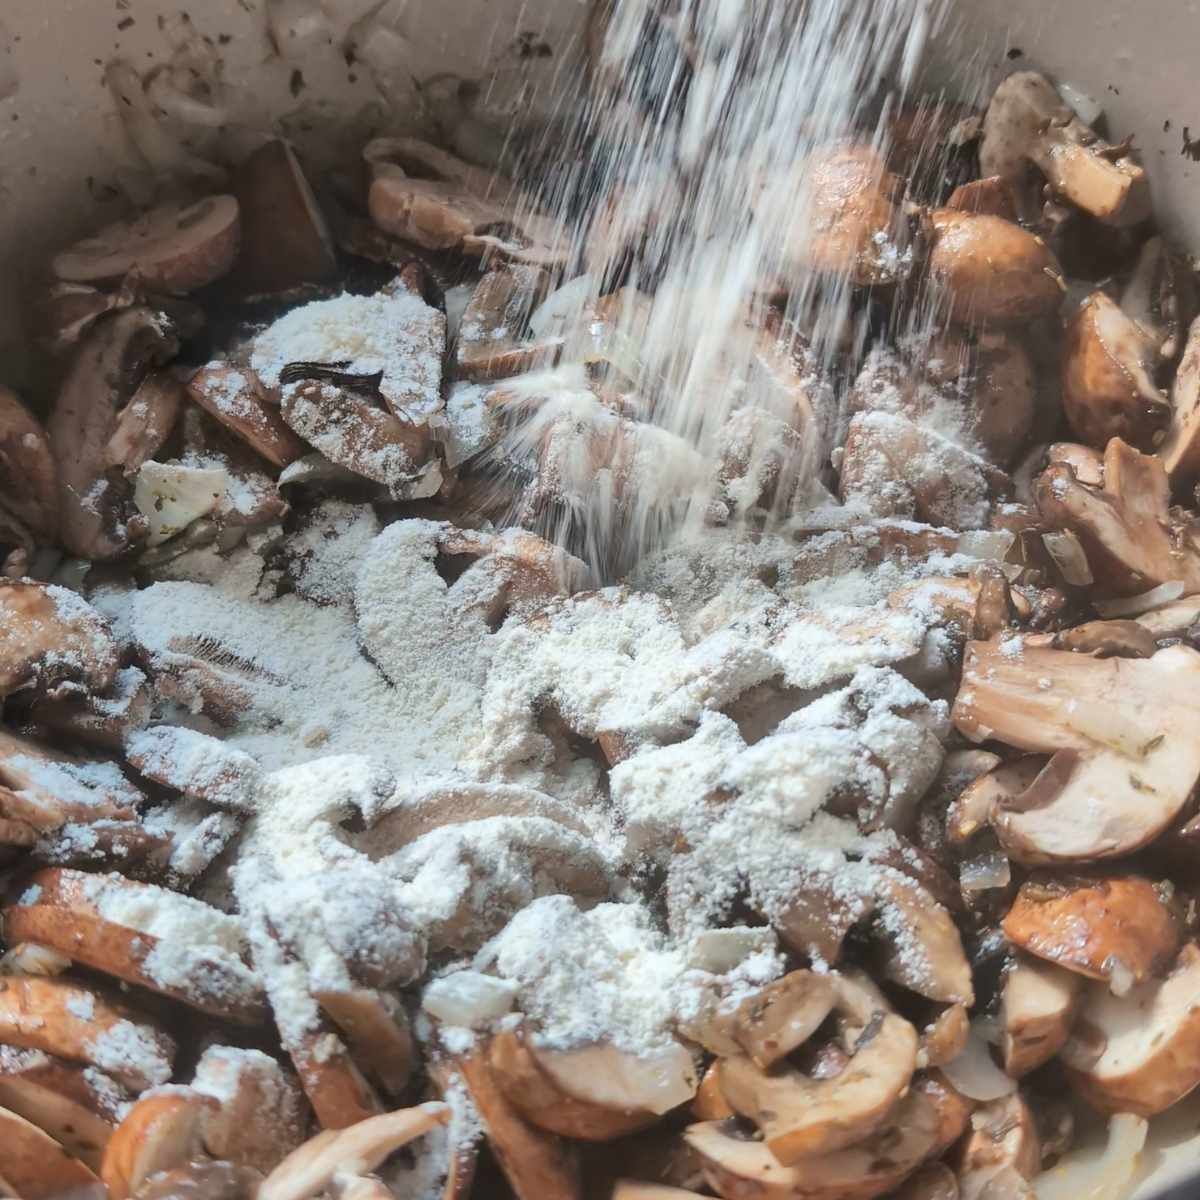 flour being sprinkled onto chopped mushrooms in a pan to thicken the soup.